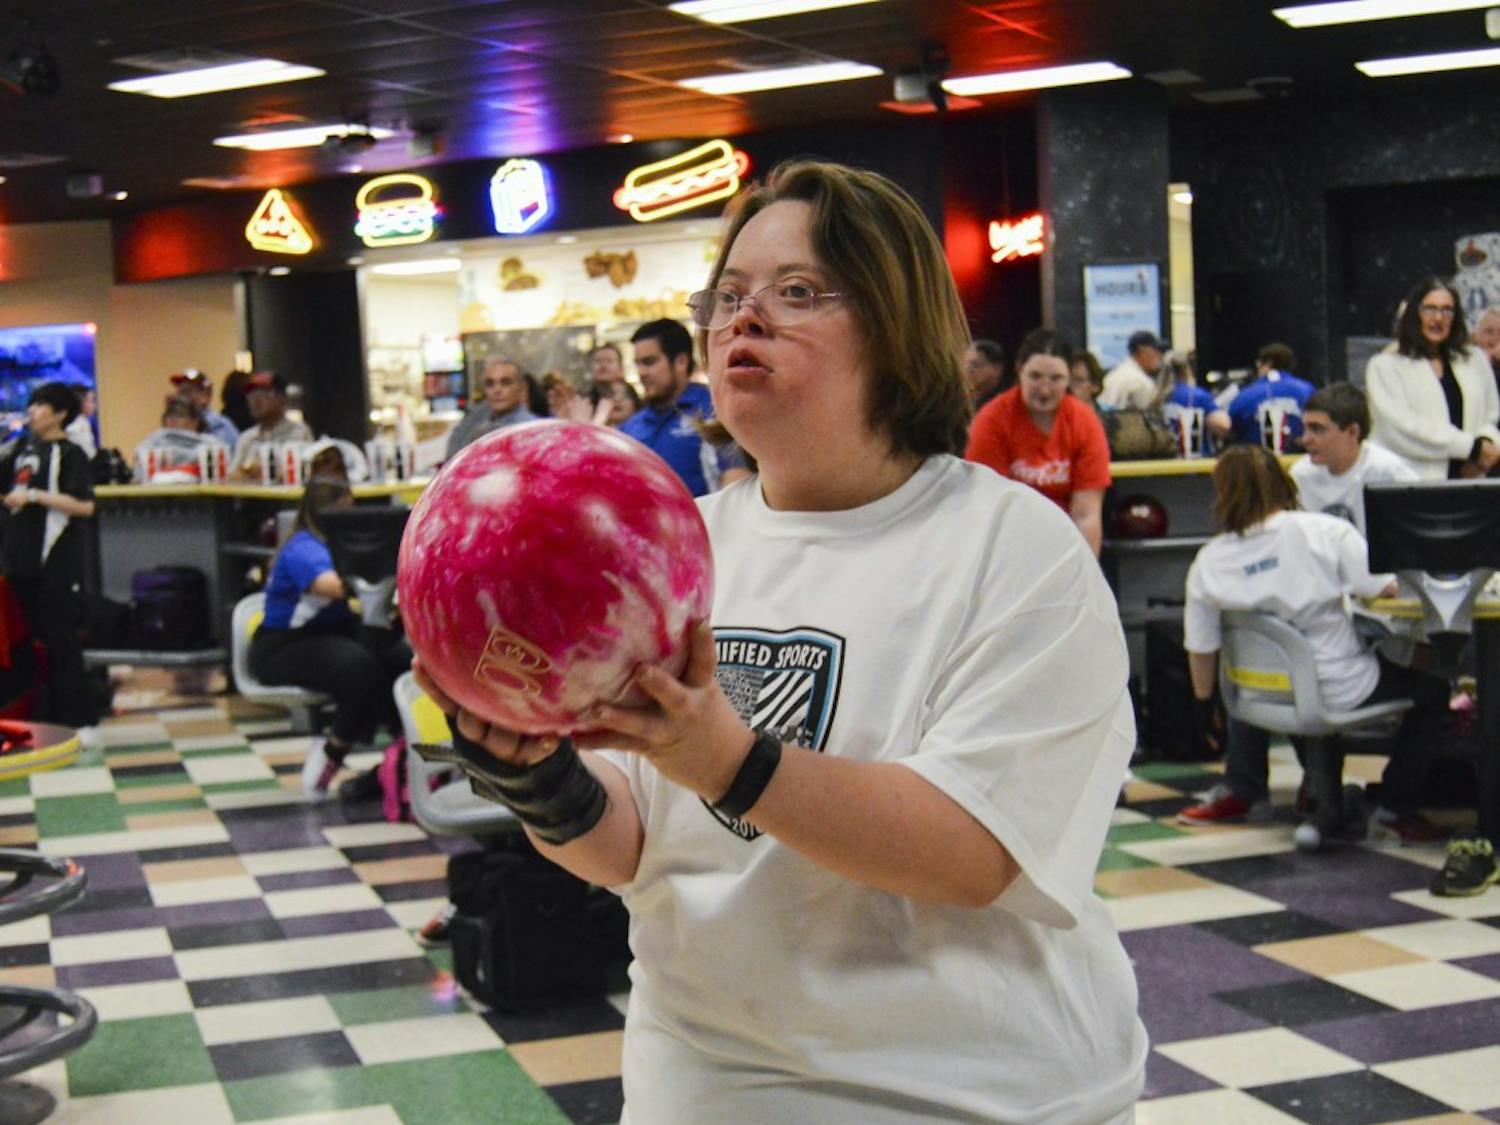 Sarah Wilson approaches the line to deliver the ball down the lane Saturday, Feb. 6, 2016 at the Special Olympic Bowling tournament. Wilson has been bowling since she was 3 years old.